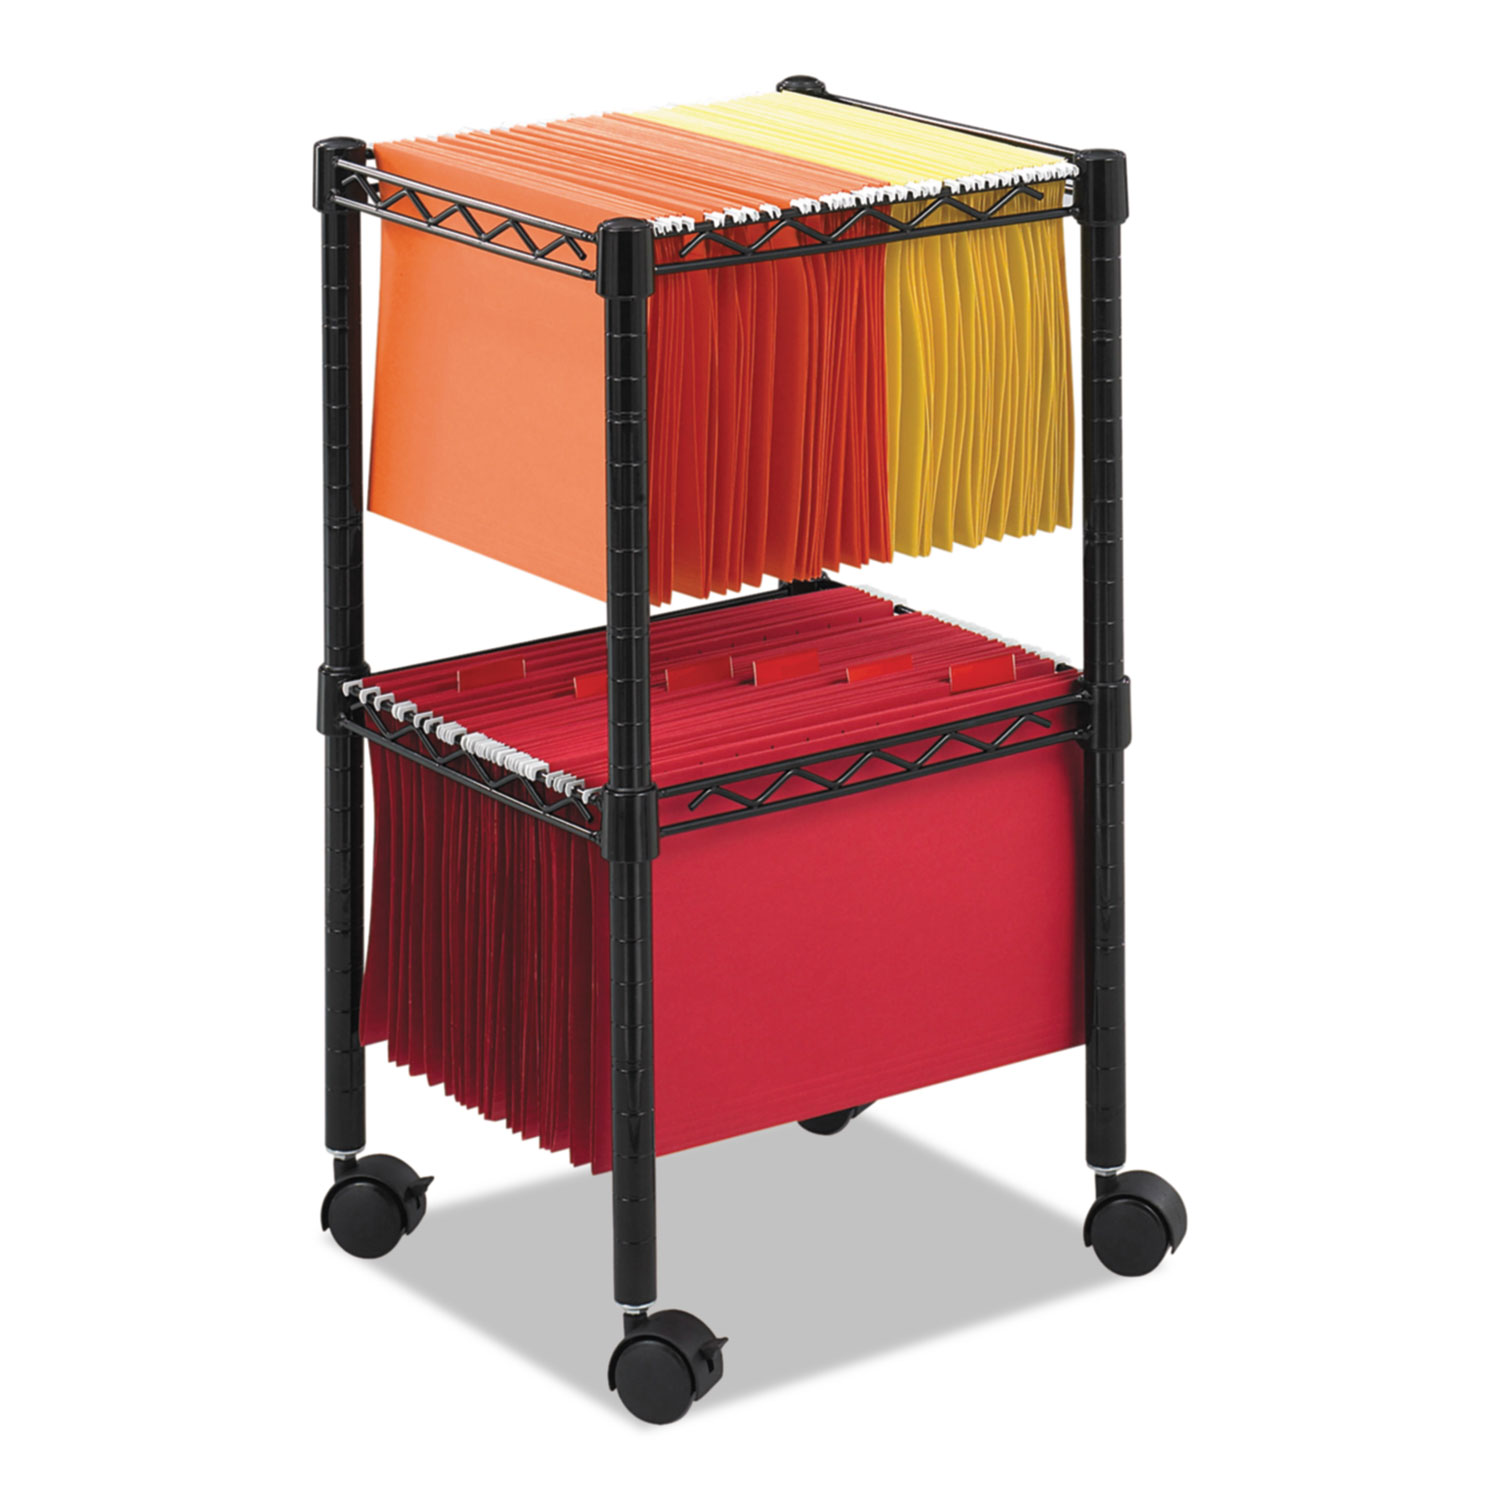  Safco 5221BL Two-Tier Compact Mobile Wire File Cart, Steel, 15.5w x 14d x 27.5h, Black (SAF5221BL) 